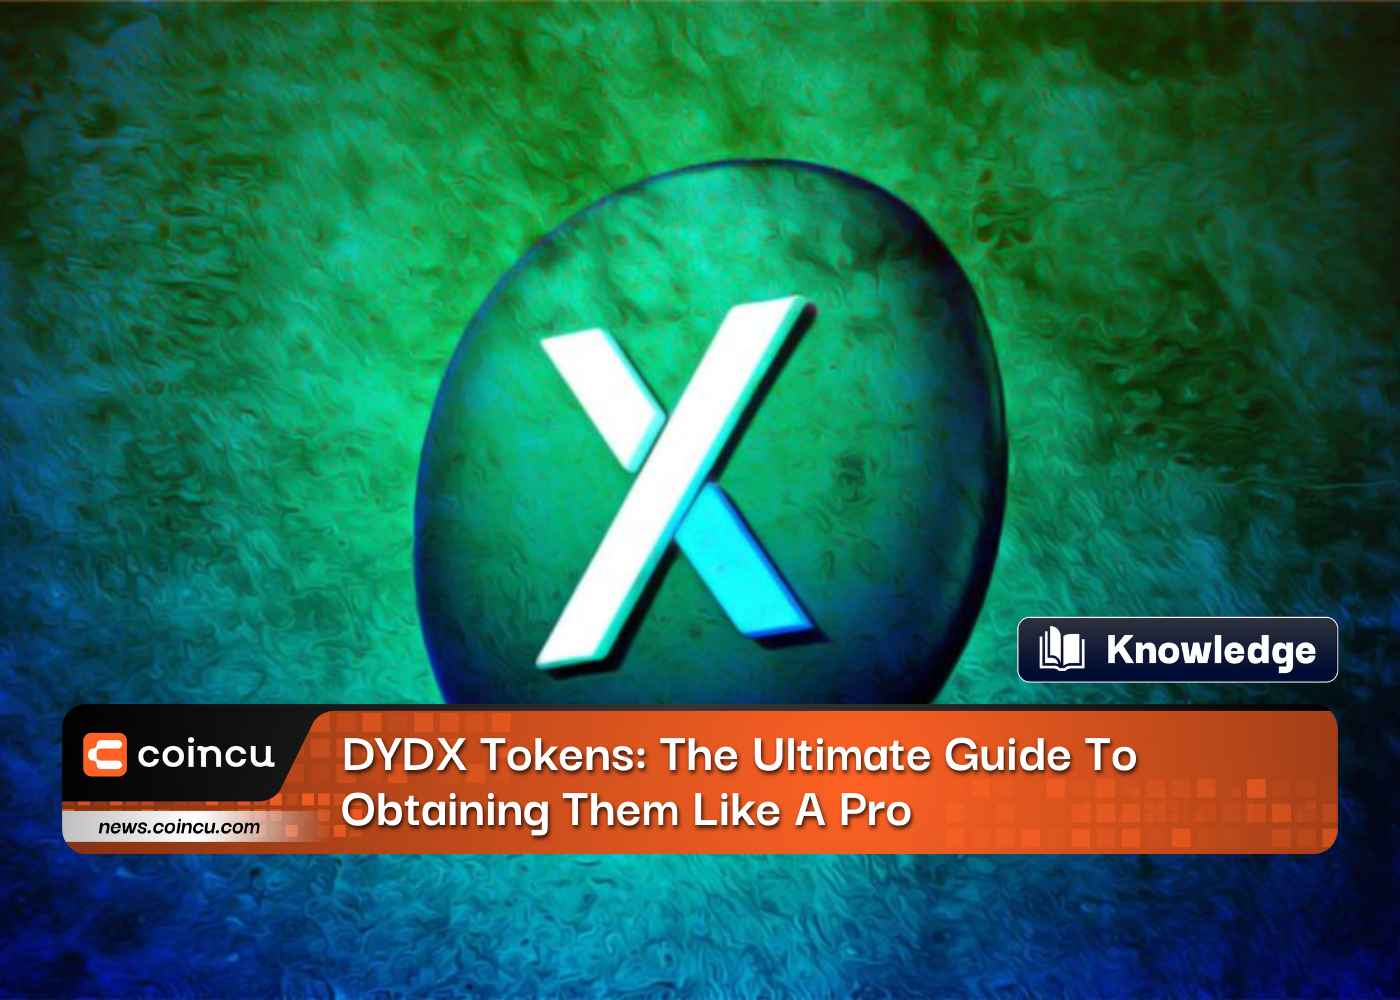 DYDX Tokens: The Ultimate Guide To Obtaining Them Like A Pro